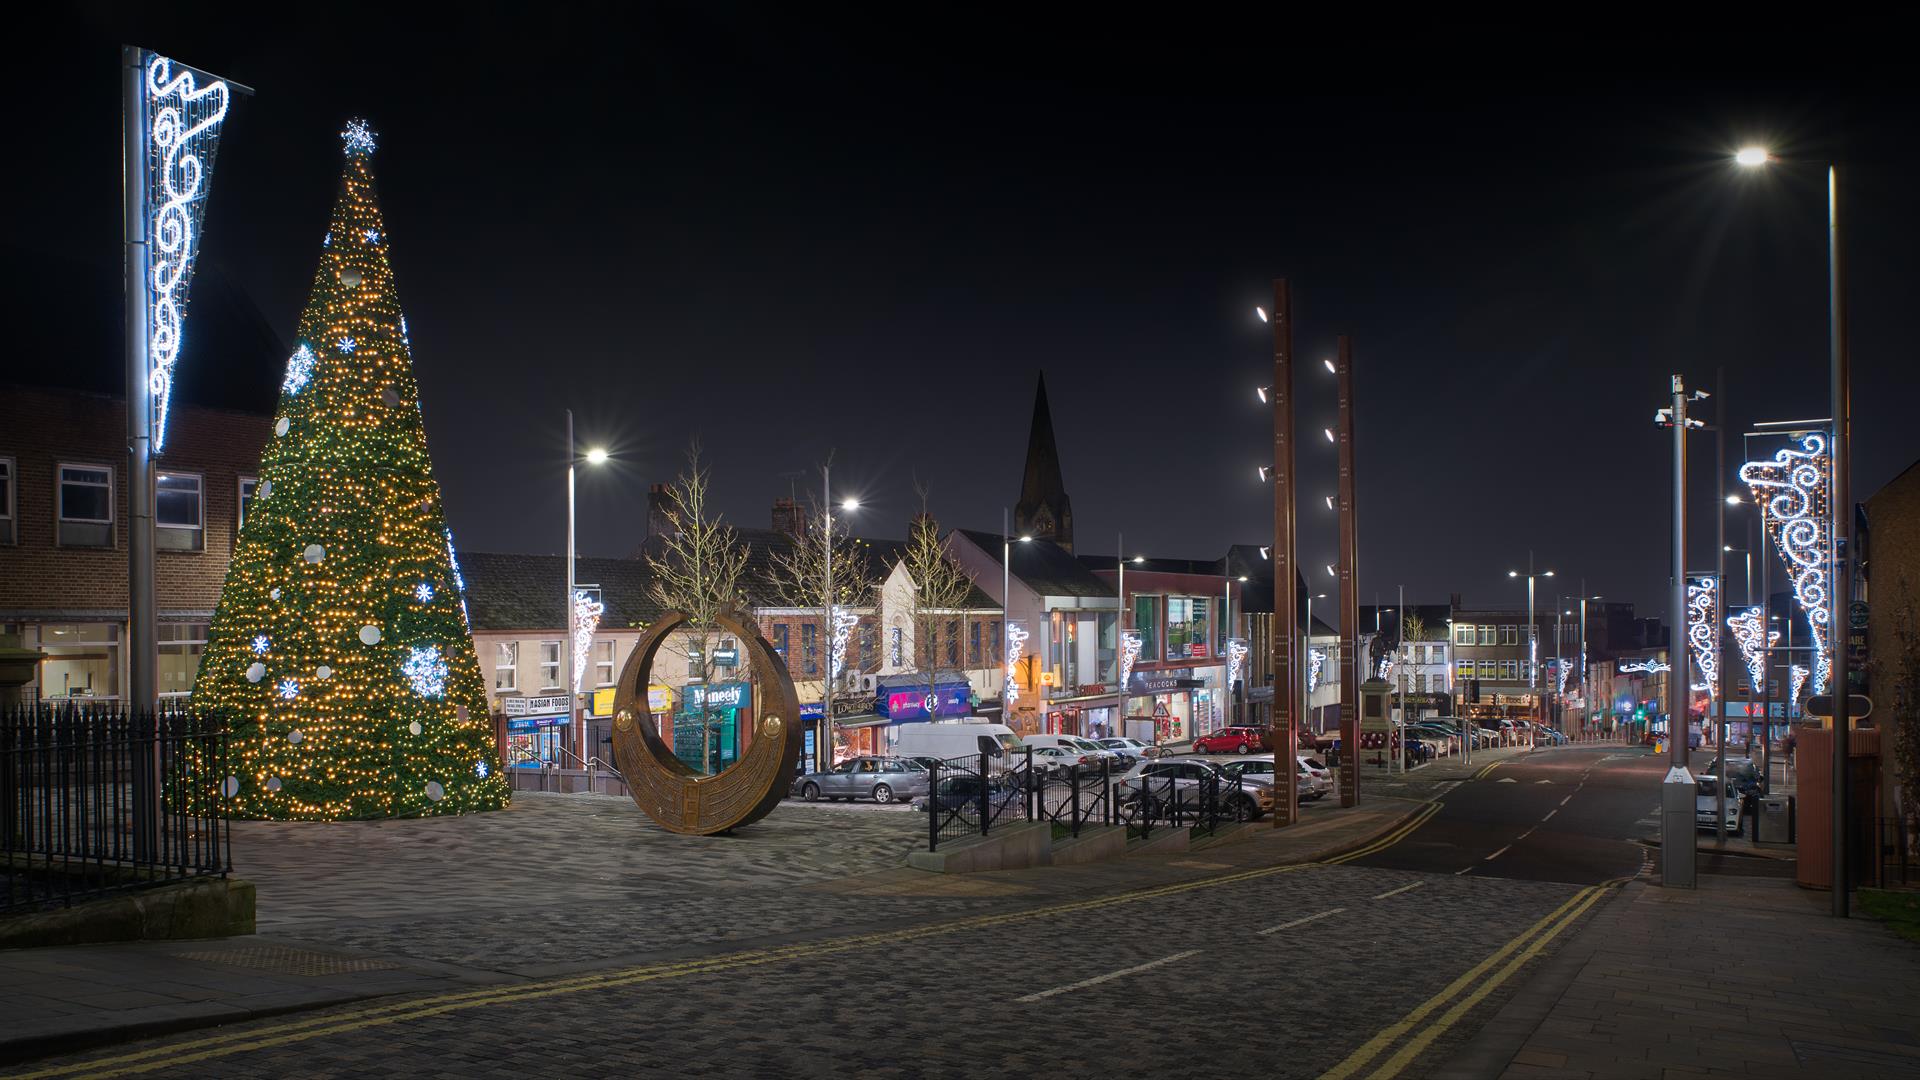 Market Square in Dungannon pictured at night with Christmas tree and lights